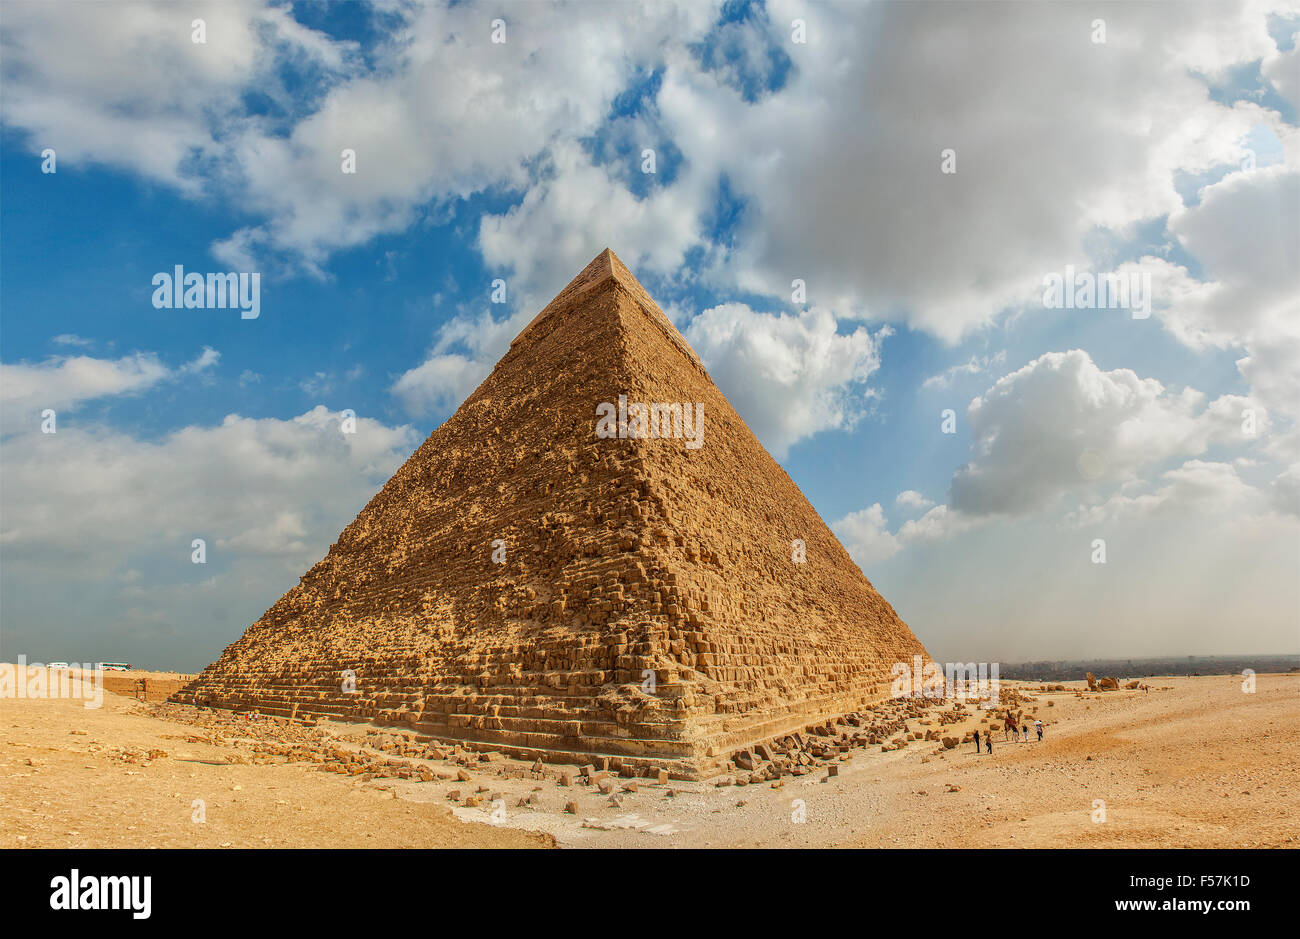 Image of the great pyramid of Giza. Cairo, Egypt. Stock Photo